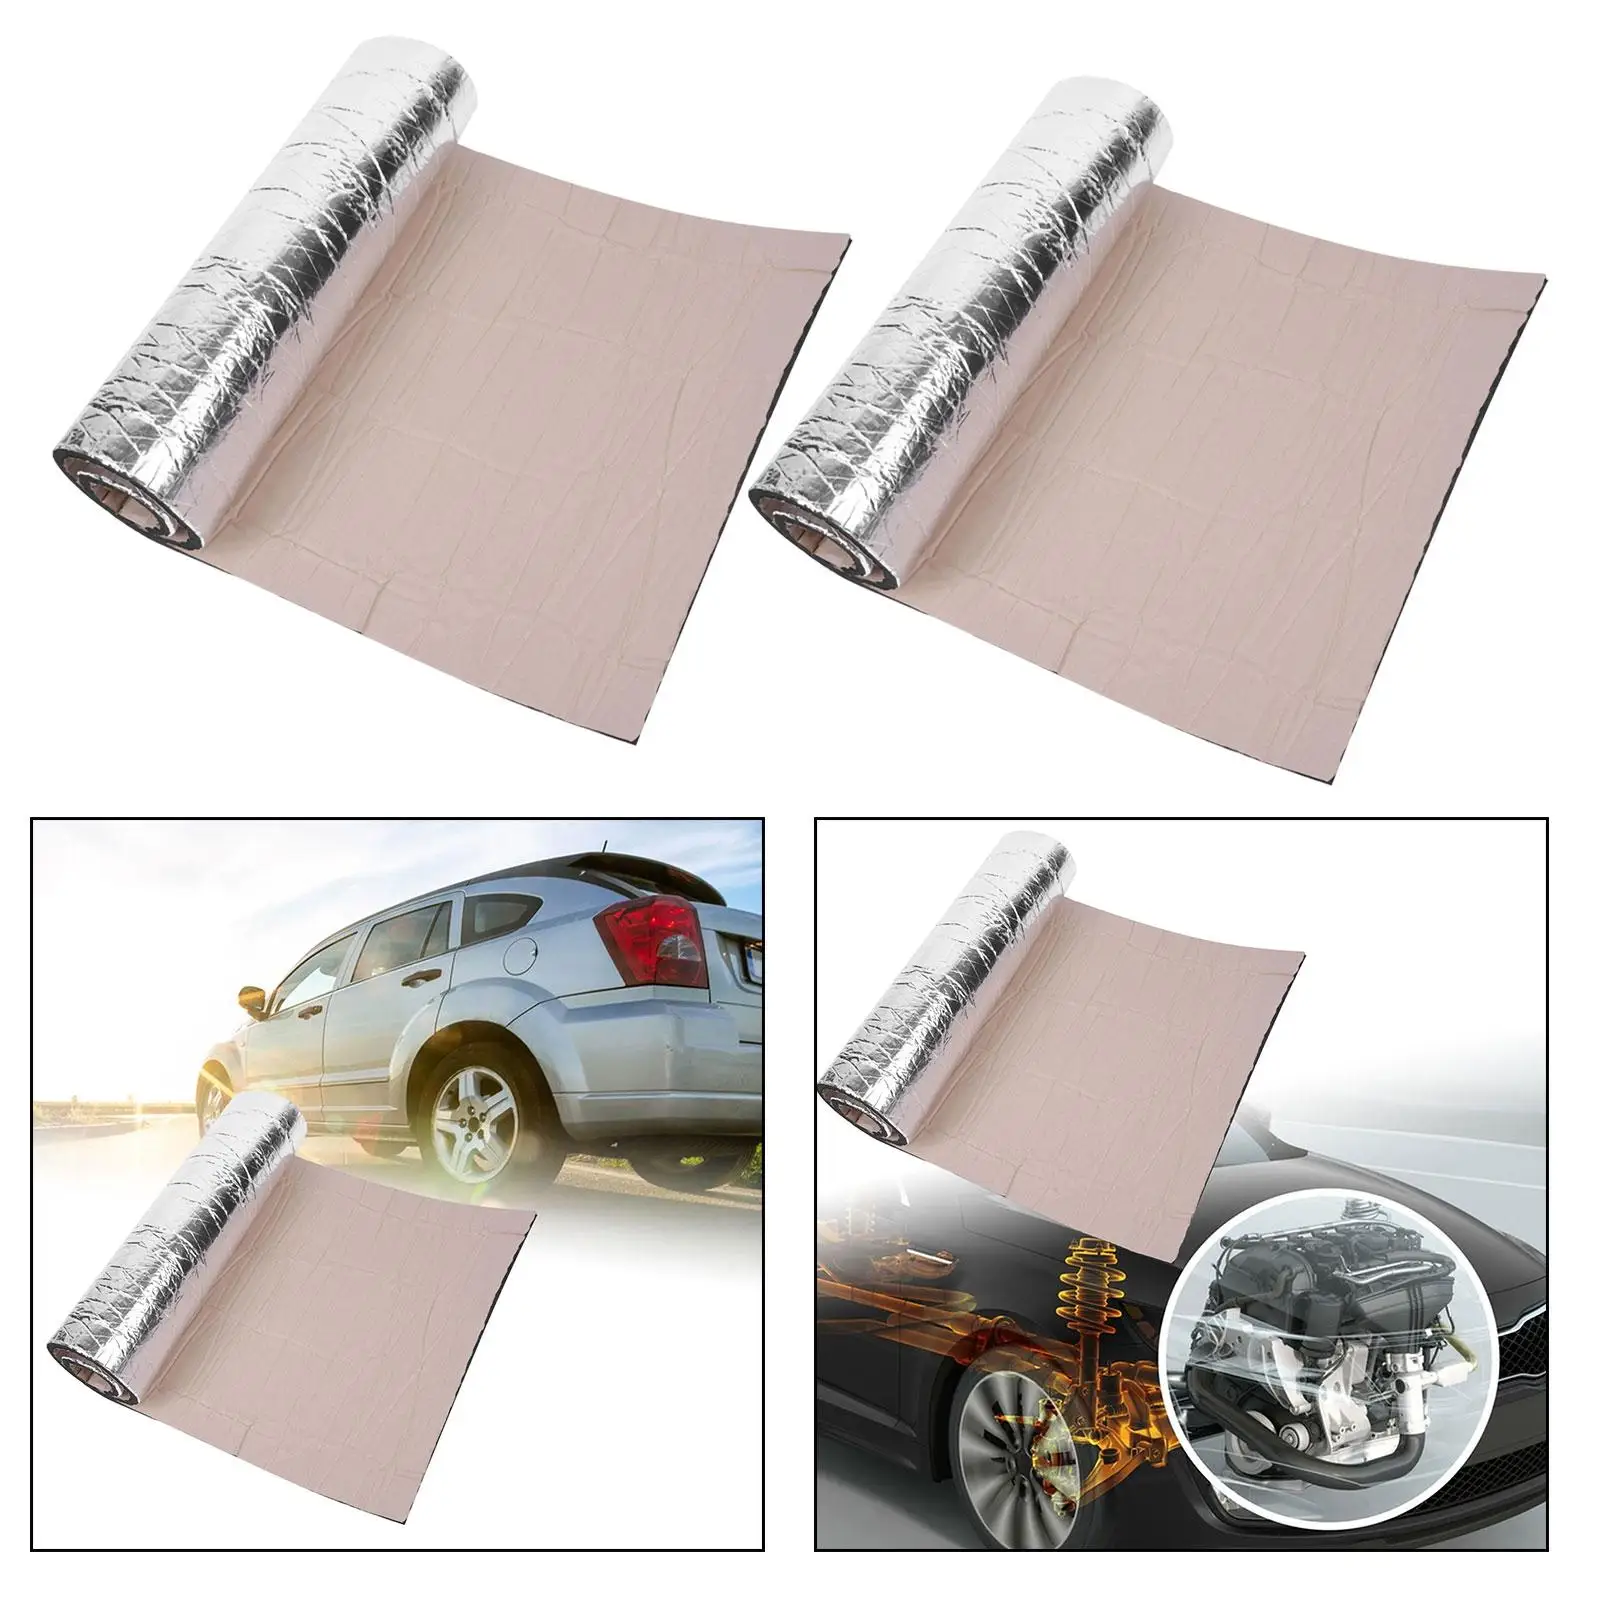 Sound Deadener Mat for Cars 100cmx40cm Self Adhesive Audio Noise Insulation for Chassis Engine Car Hood Roof Easy to Cut